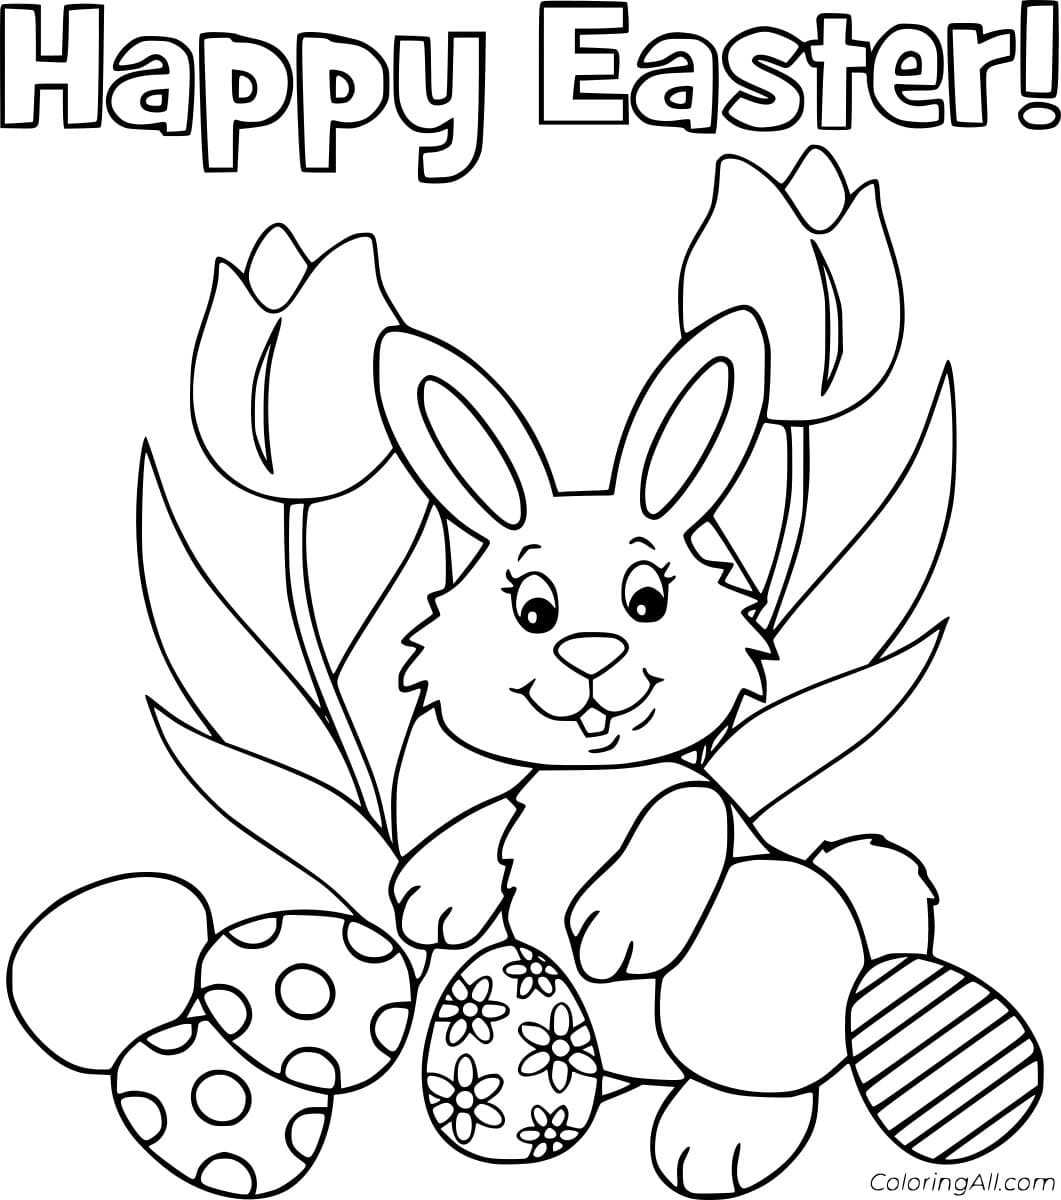 Happy Easter With Bunny And Flowers For Kids Coloring Page